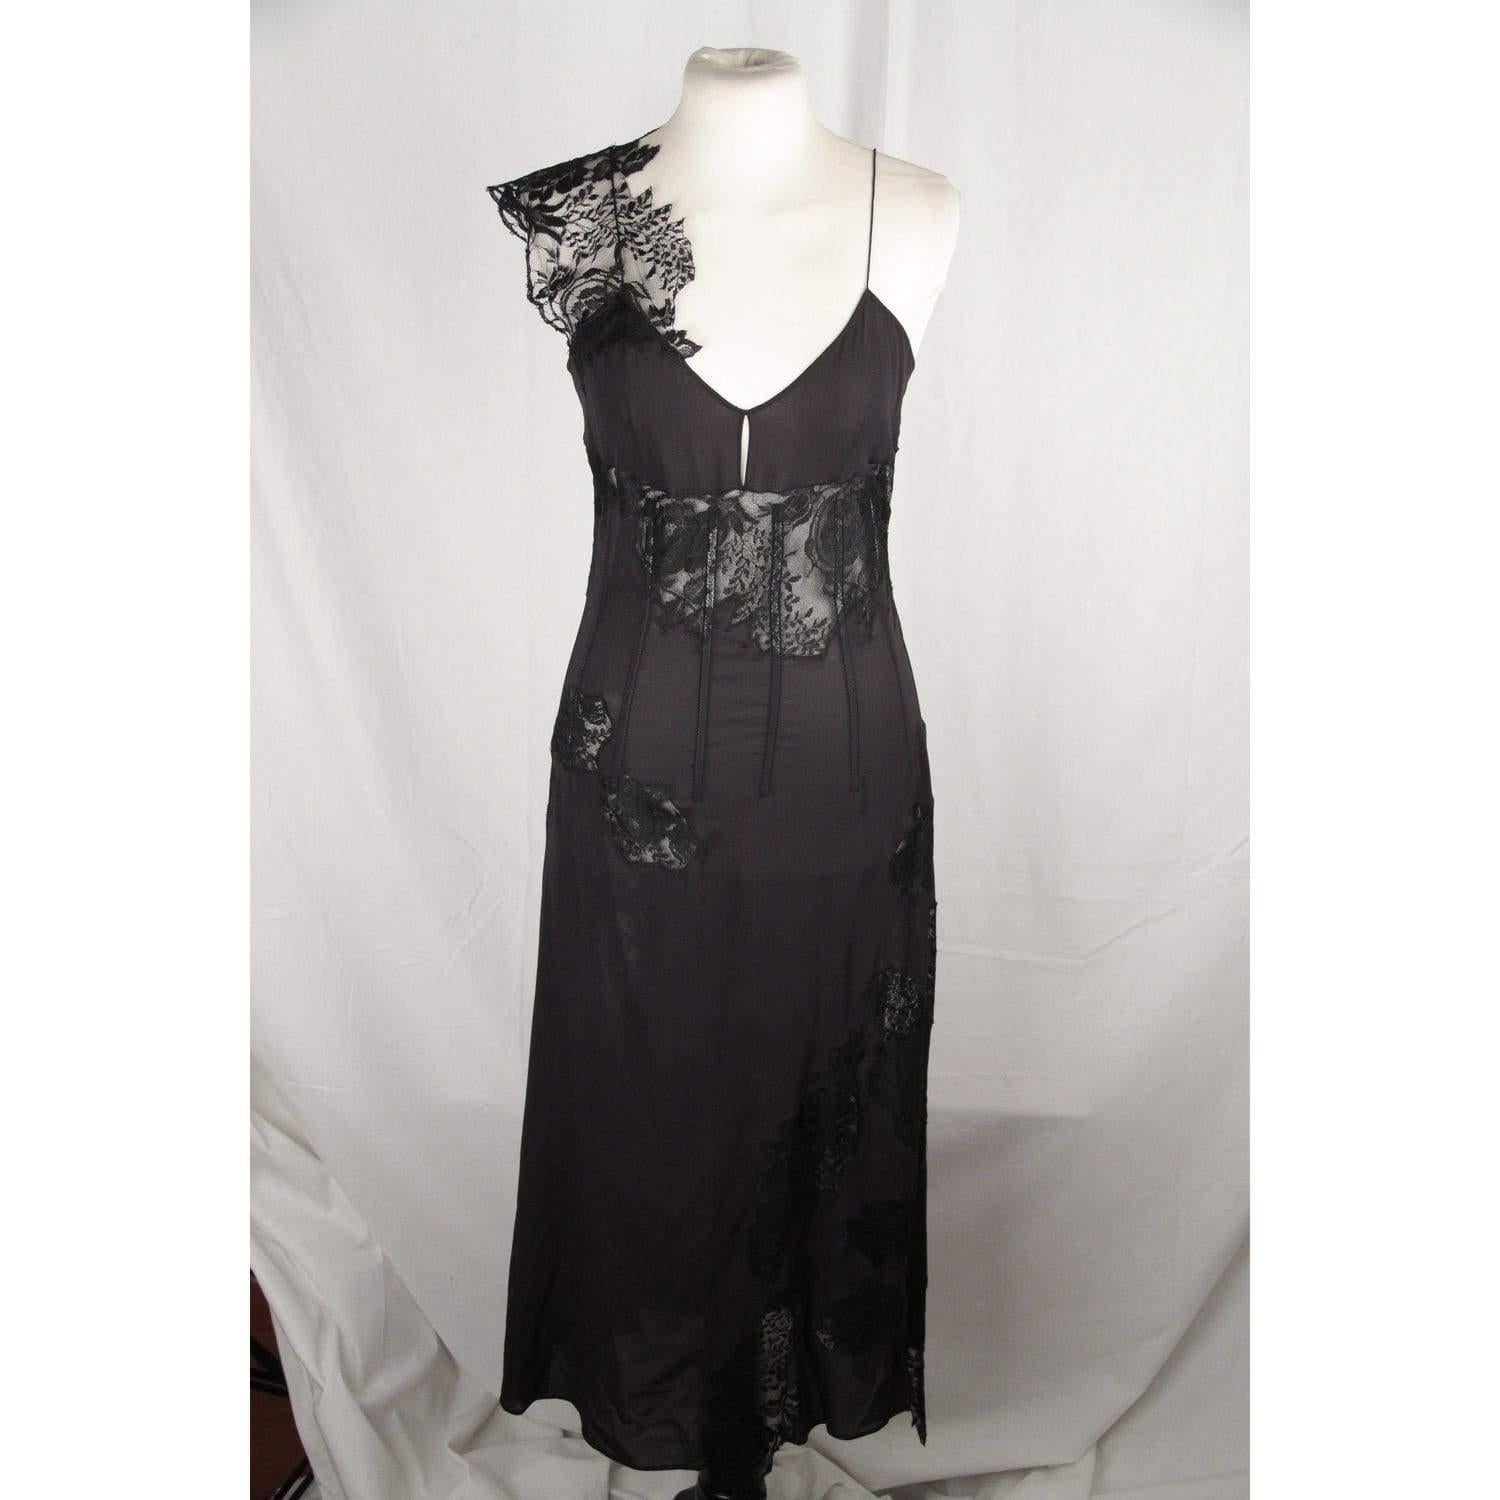 - Black Sheer Fabric - Lace insert - Black color - Stays on the upper - Spaghetti strap with asymmetric lace detail - Hook & Eye closure - Size is not indicated. Estimated size is a SMALL size Measurements: - Bust (Flat - from underarm to underarm):